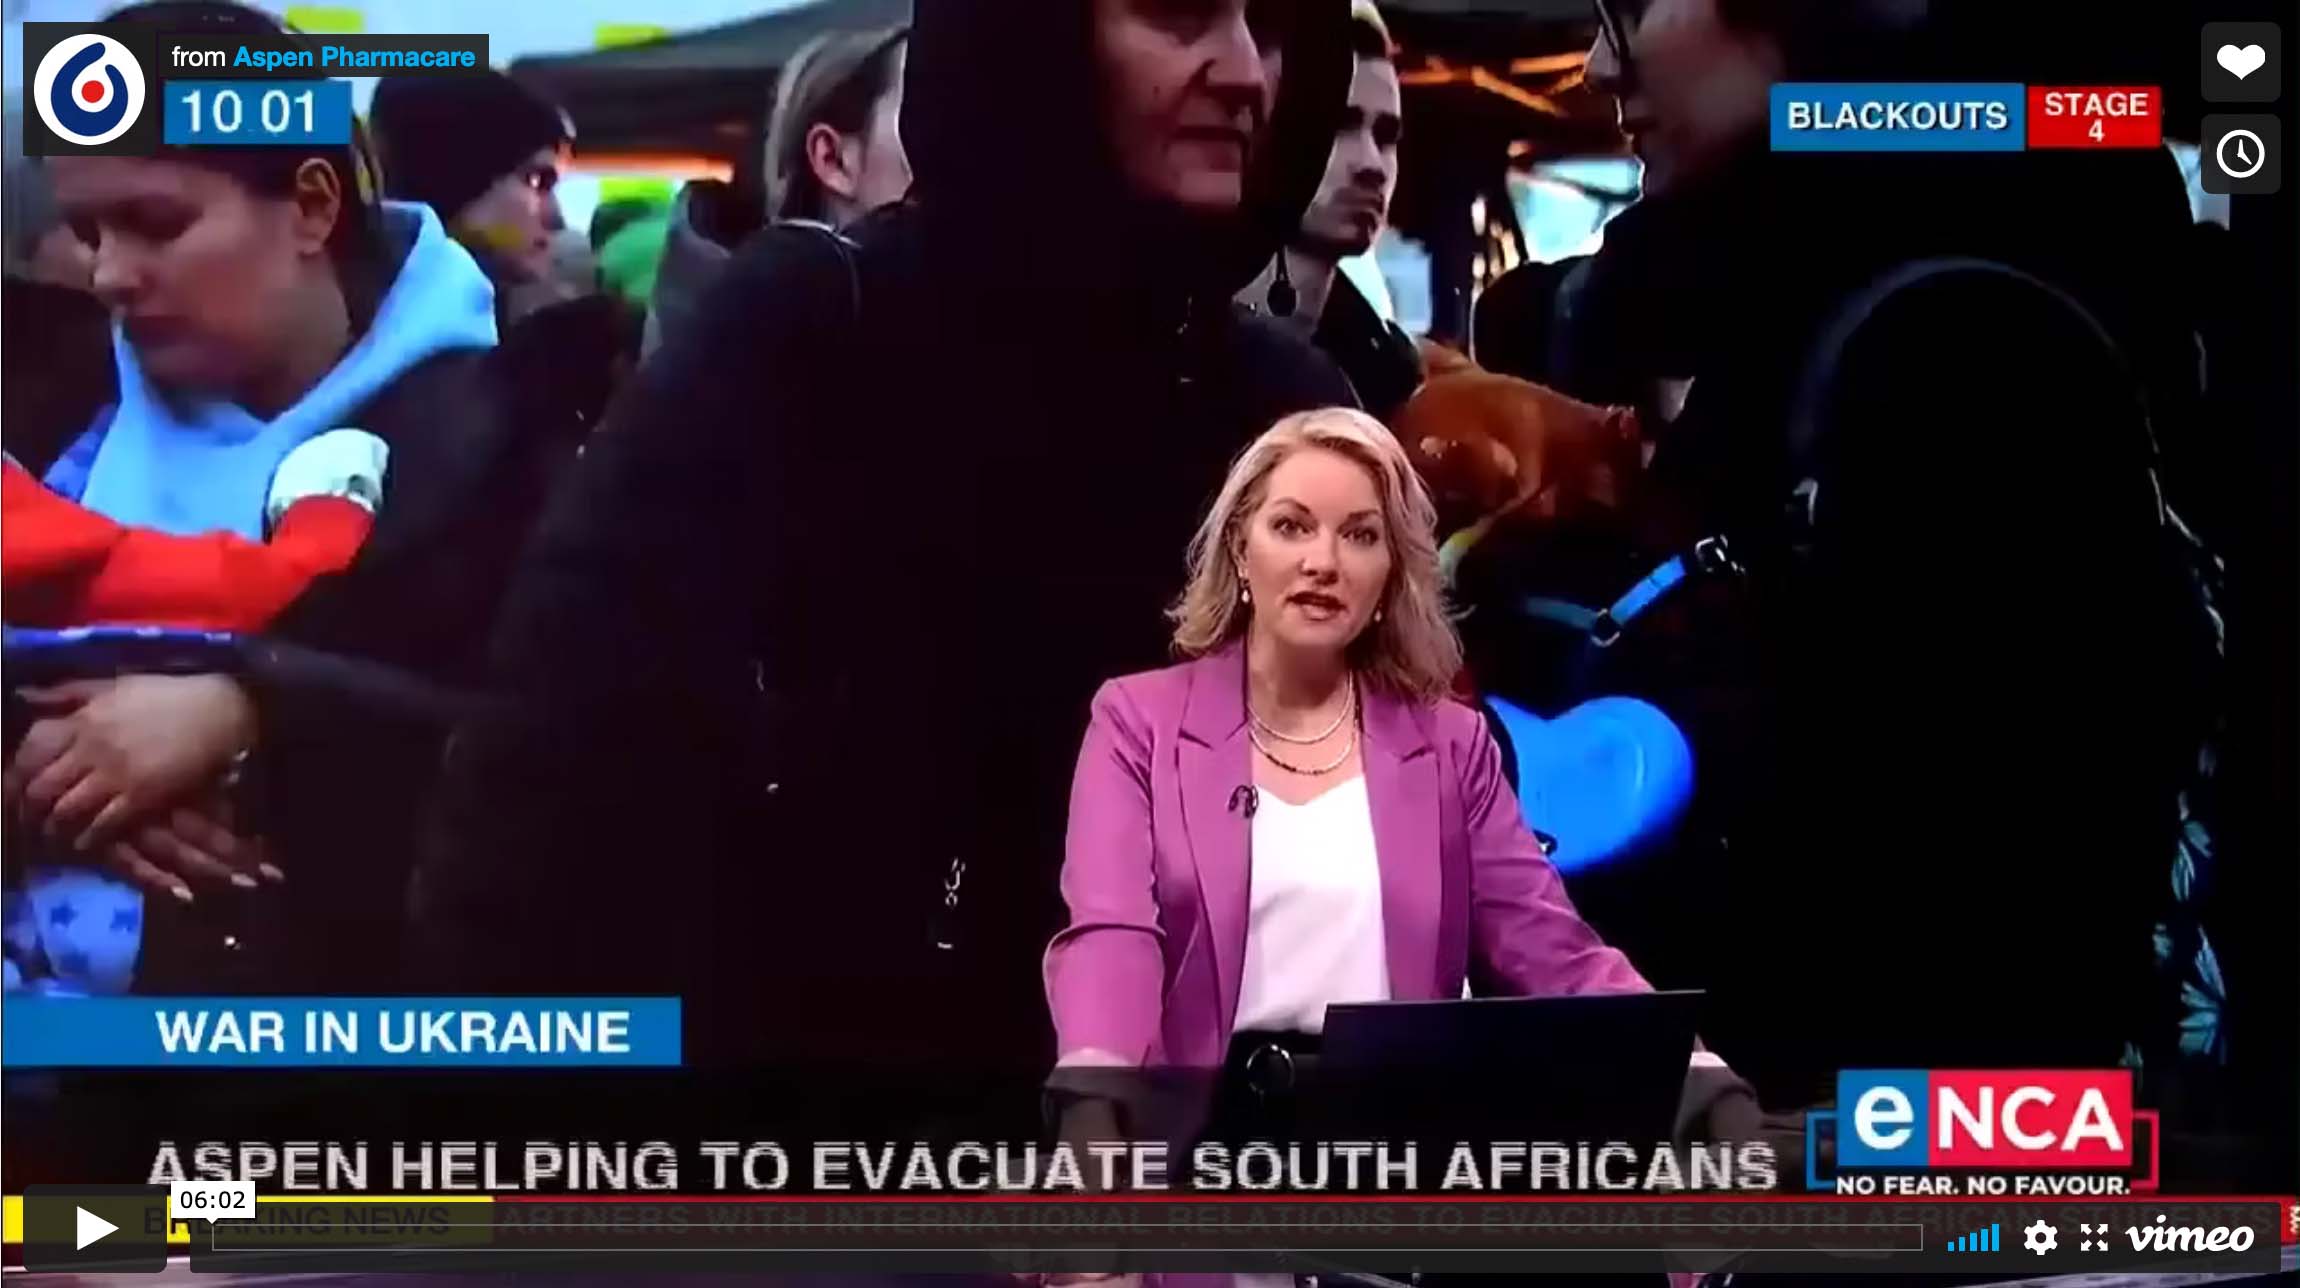 eNCA's Annika Larsen and Stavros Nicolaou discuss Aspen's role in repatriating 25 South African students out of the Ukraine